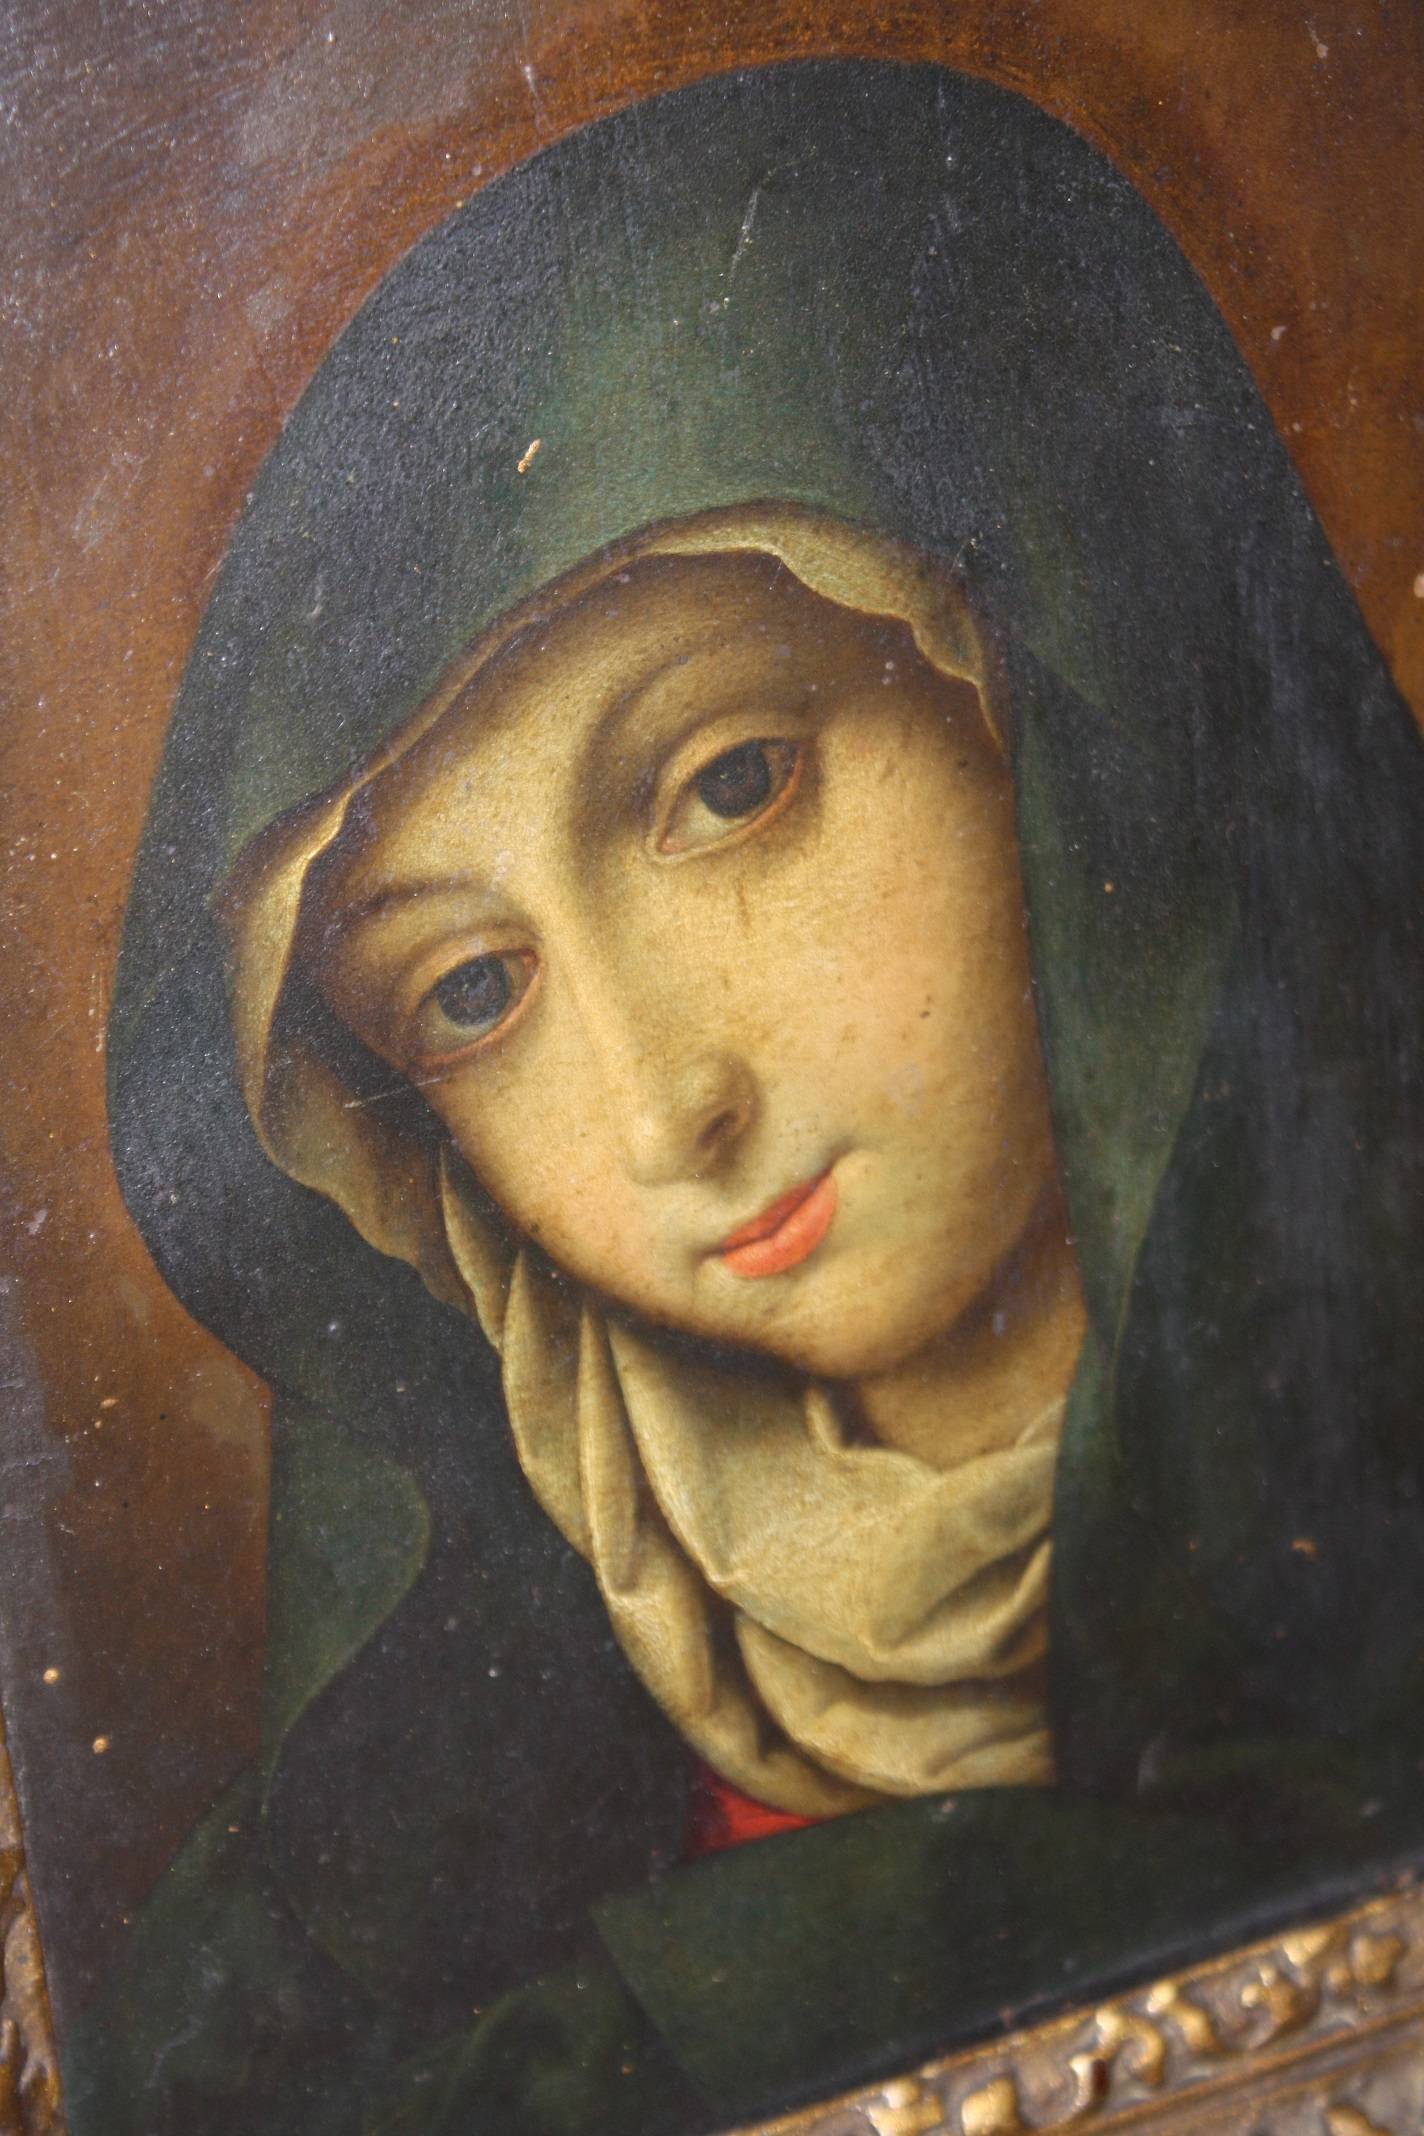 A small antique early 18th century portrait of St. Hildegard of Bingen, oil on copper painting